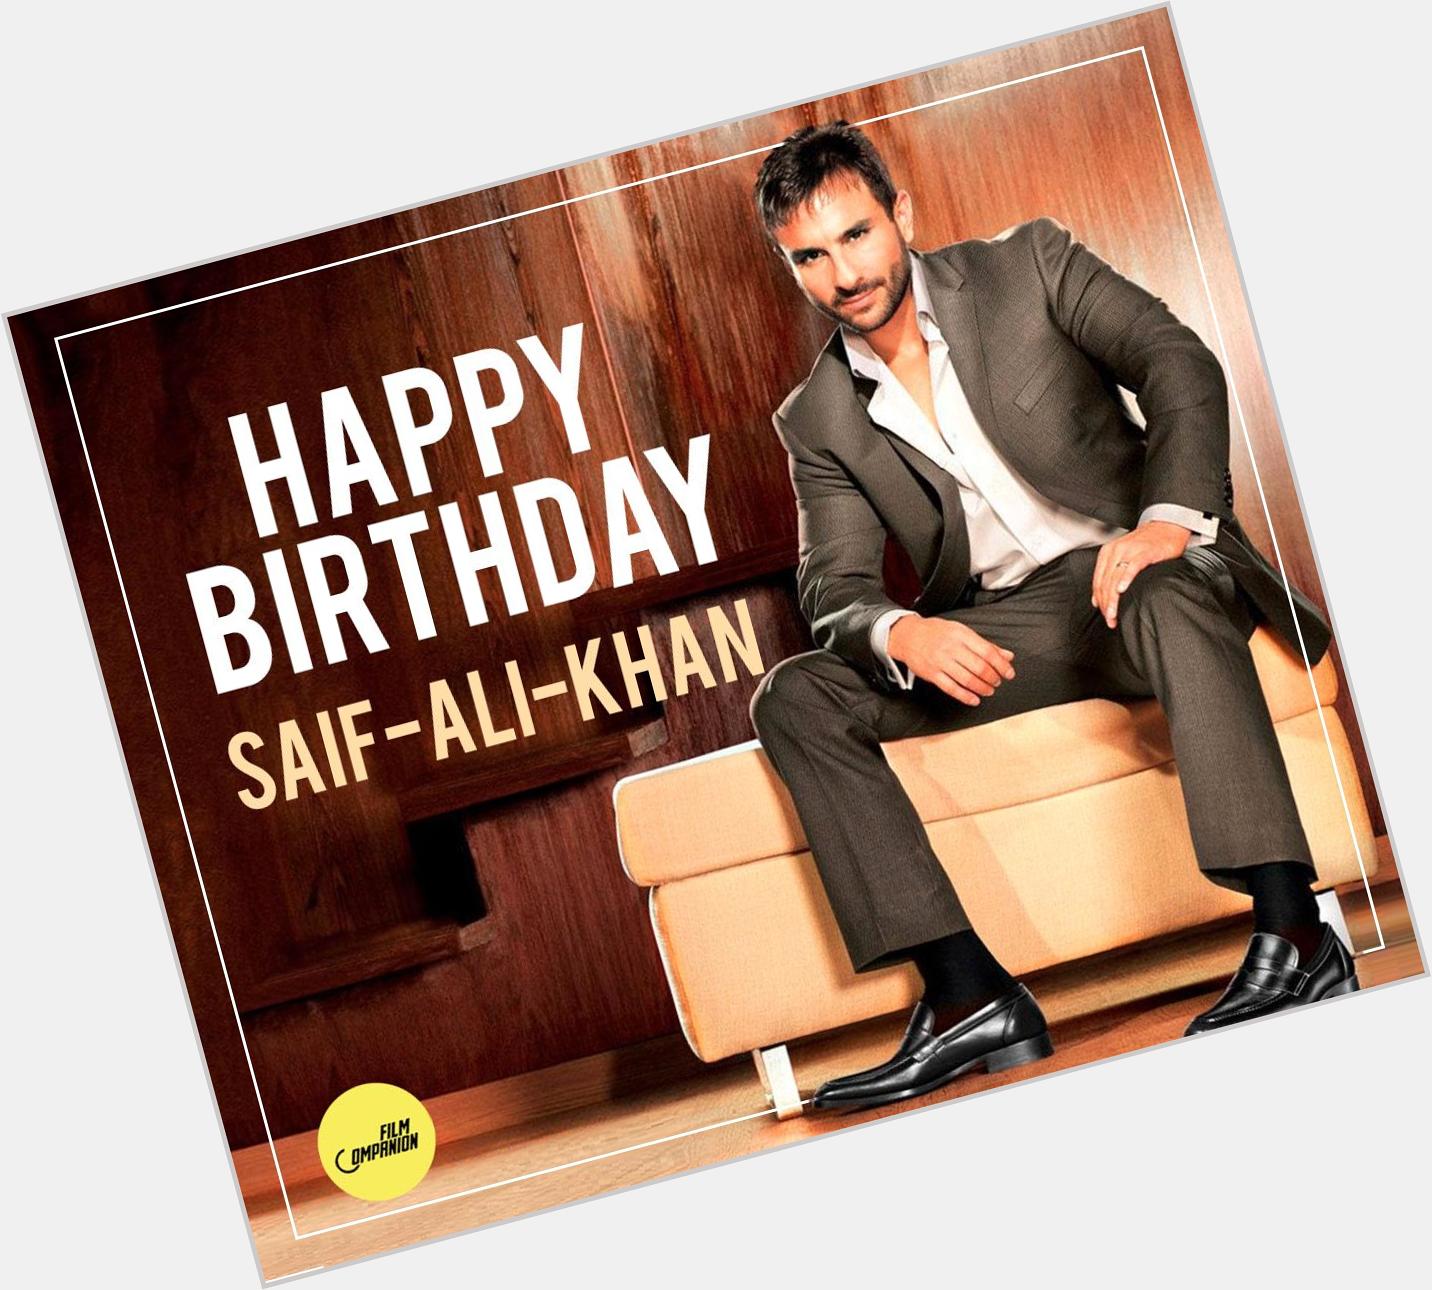 Here s wishing the talented actor Saif Ali Khan a very happy birthday! 